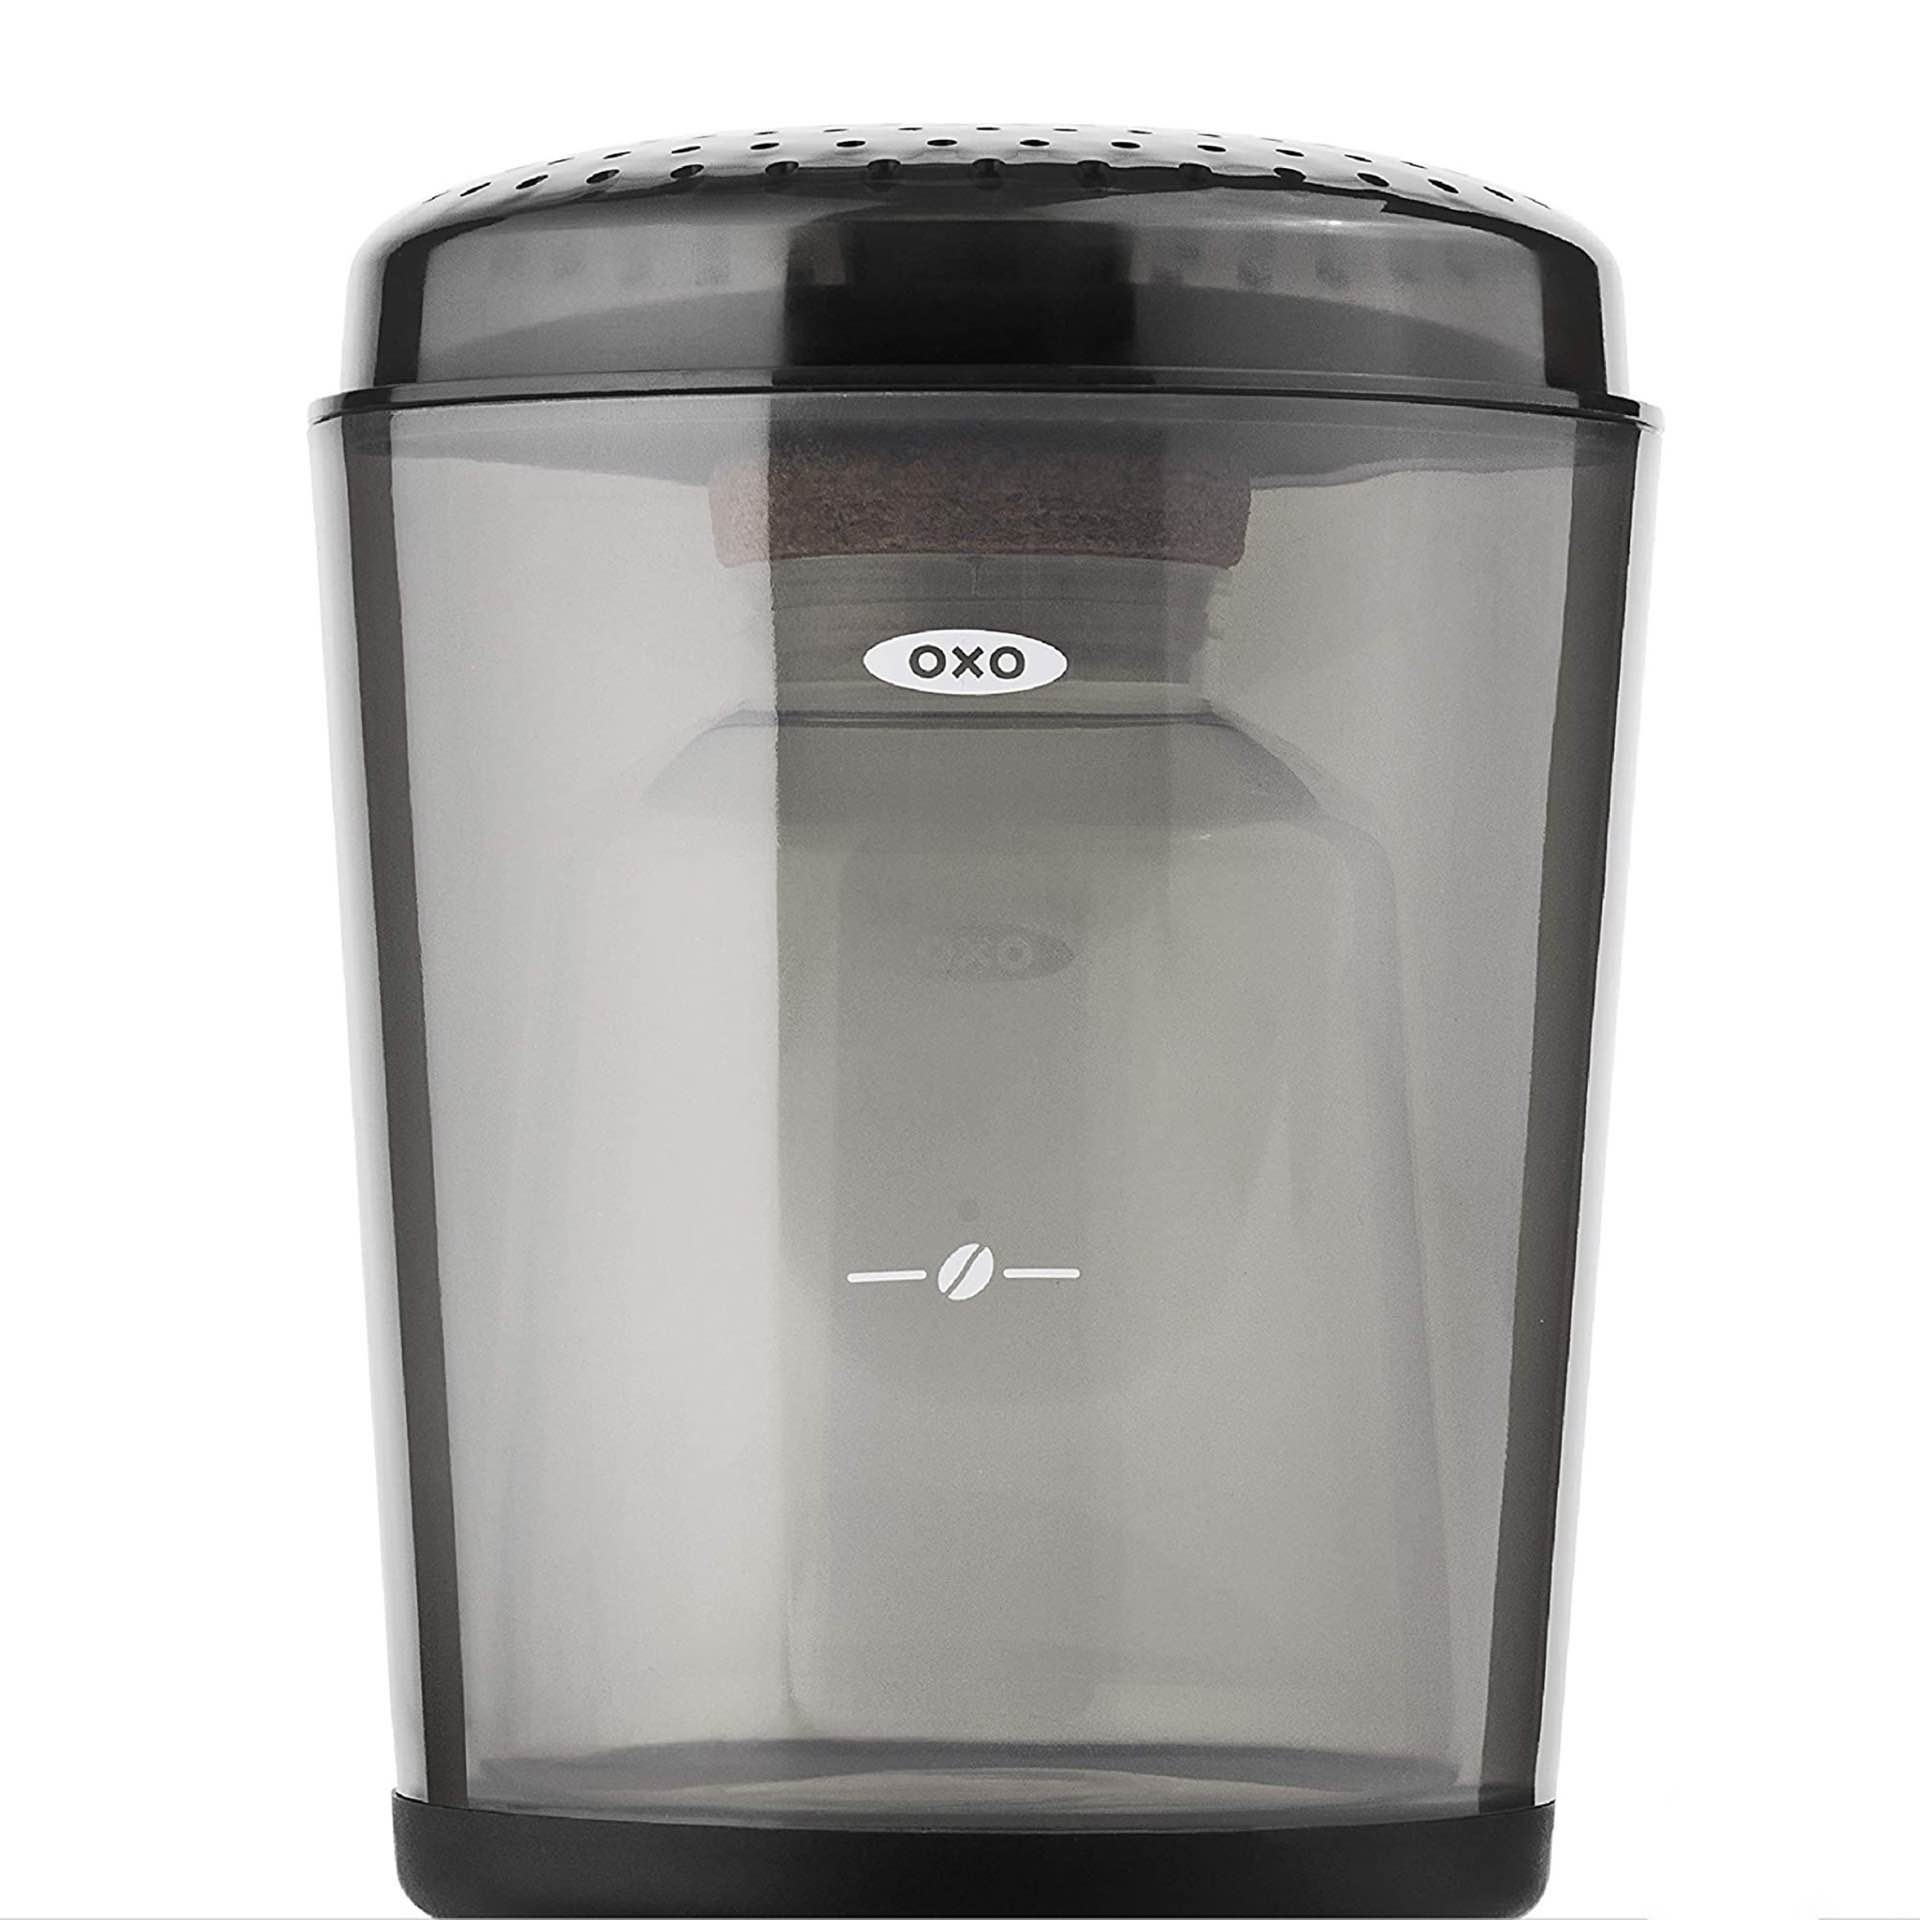 oxo-brew-compact-cold-brew-coffee-maker-nested-storage